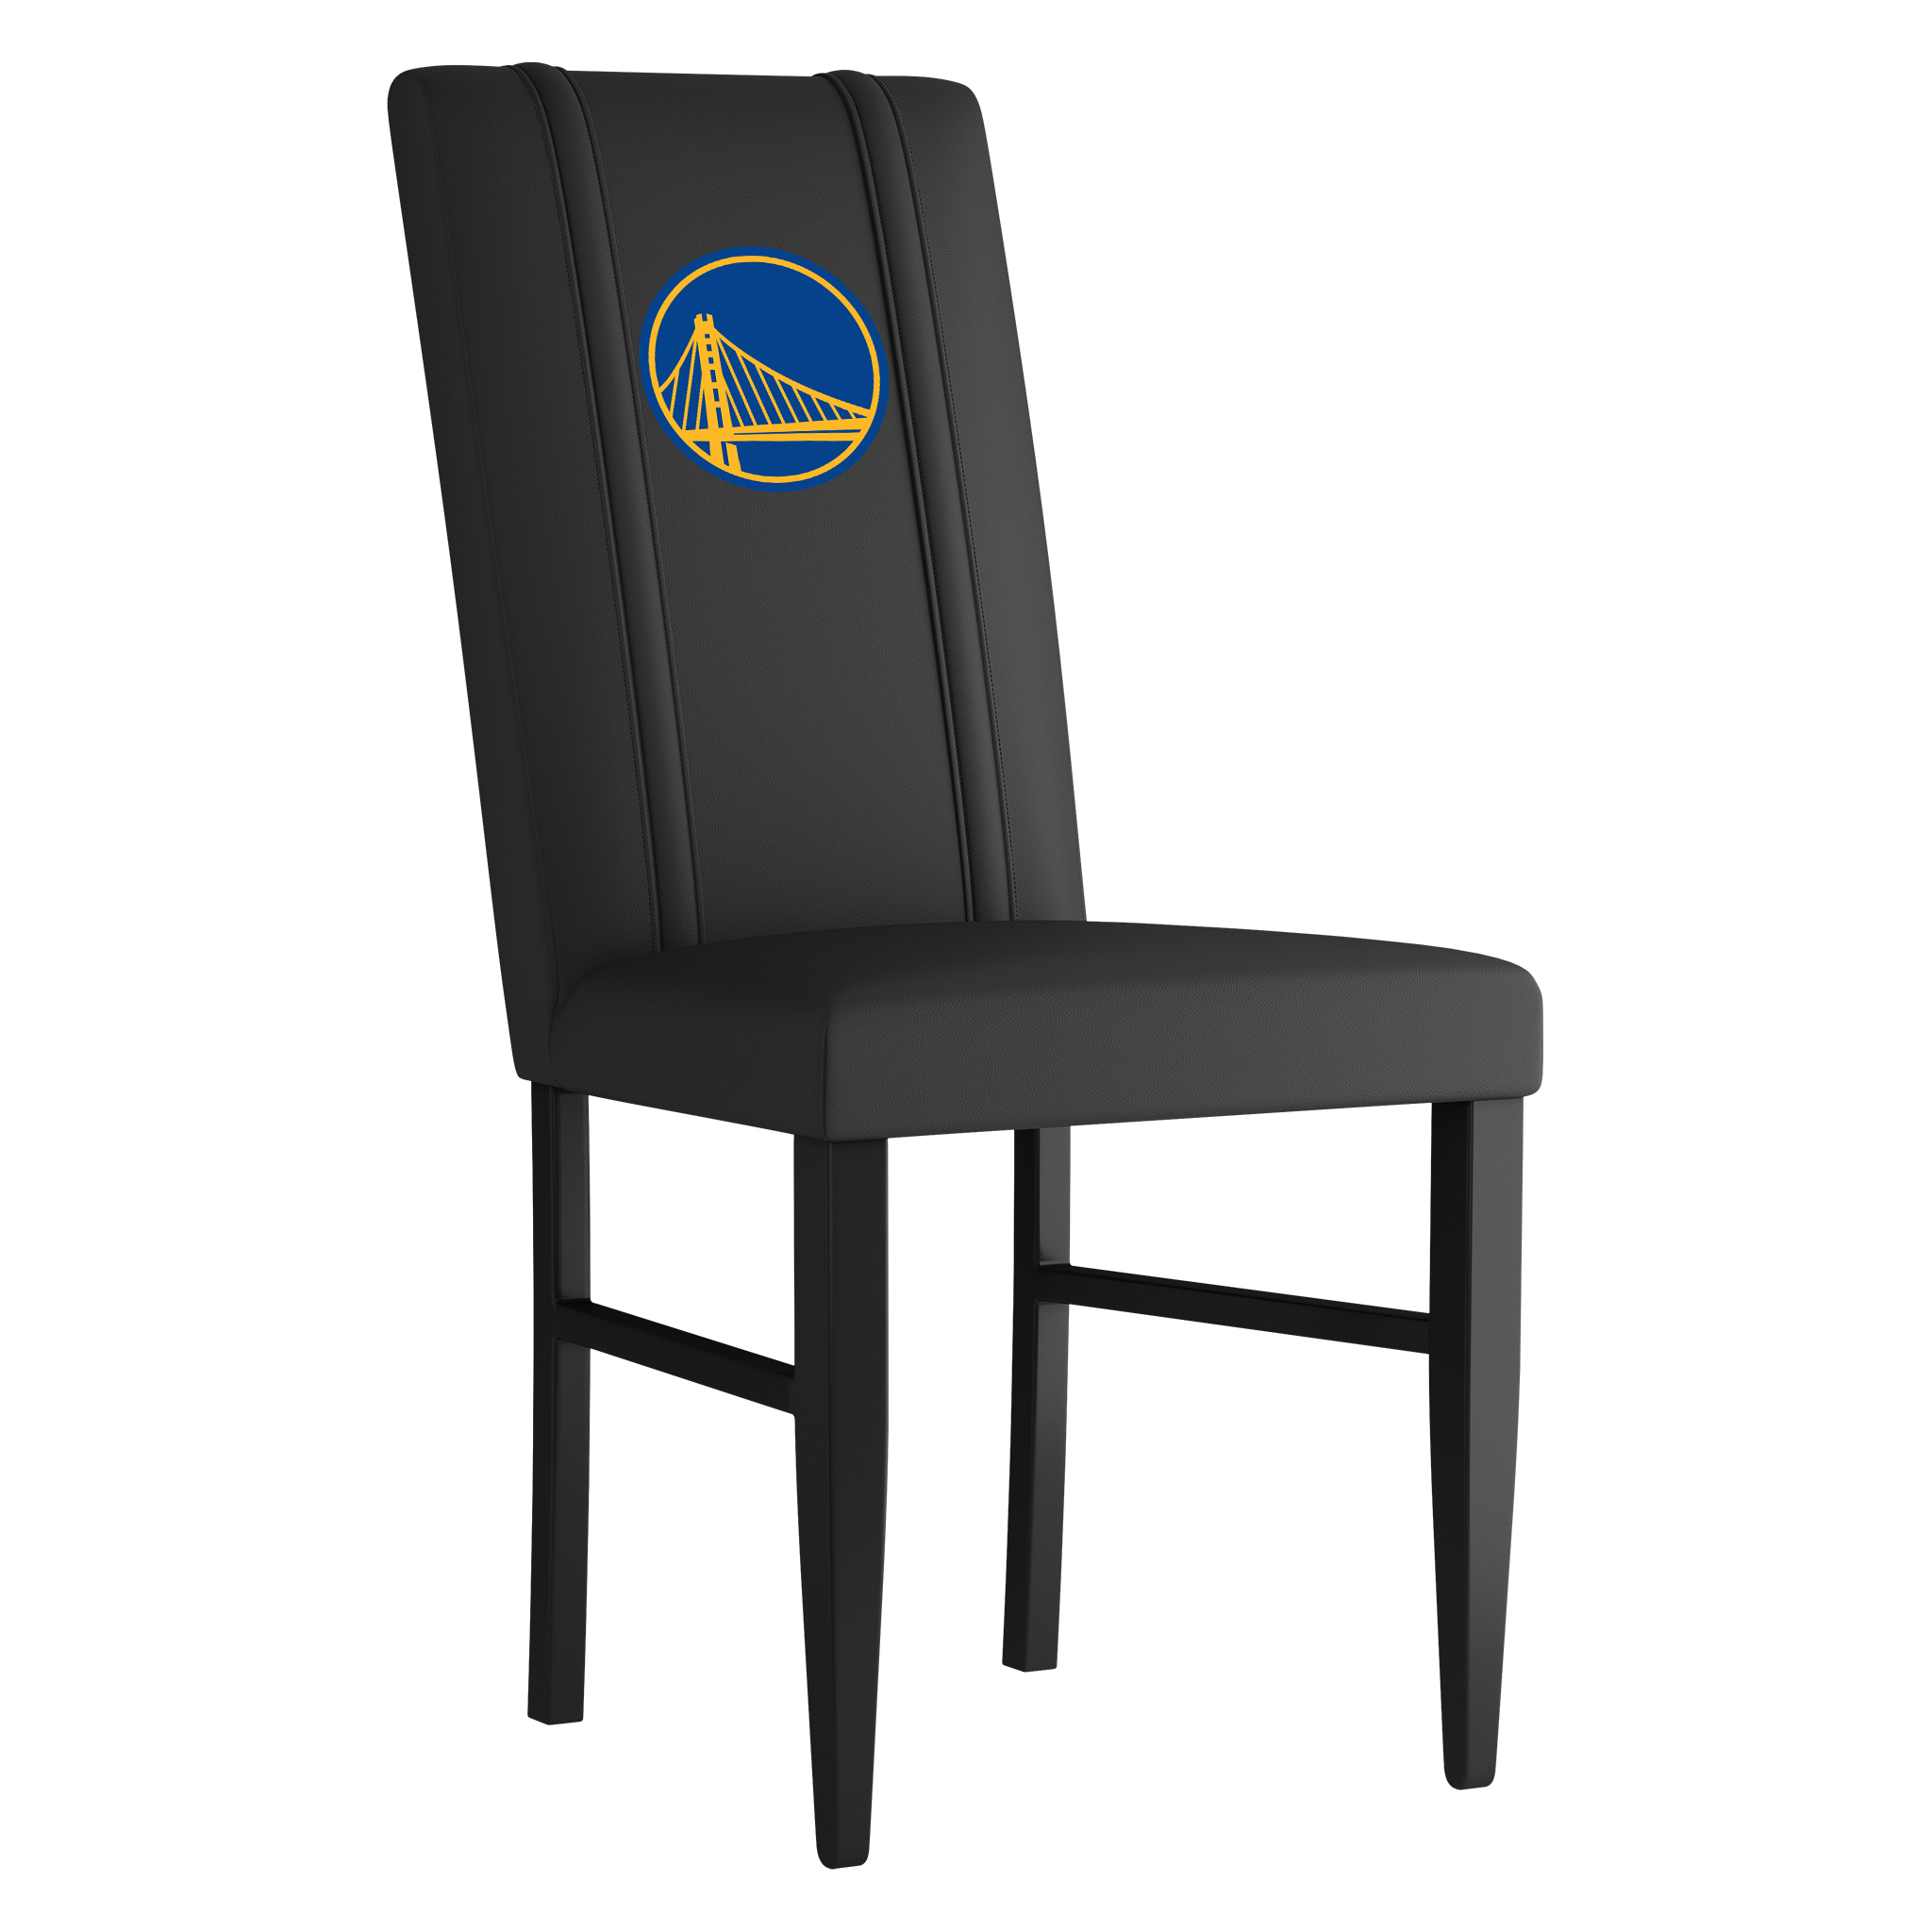 Golden State Warriors Side Chair 2000 With Golden State Warriors Logo